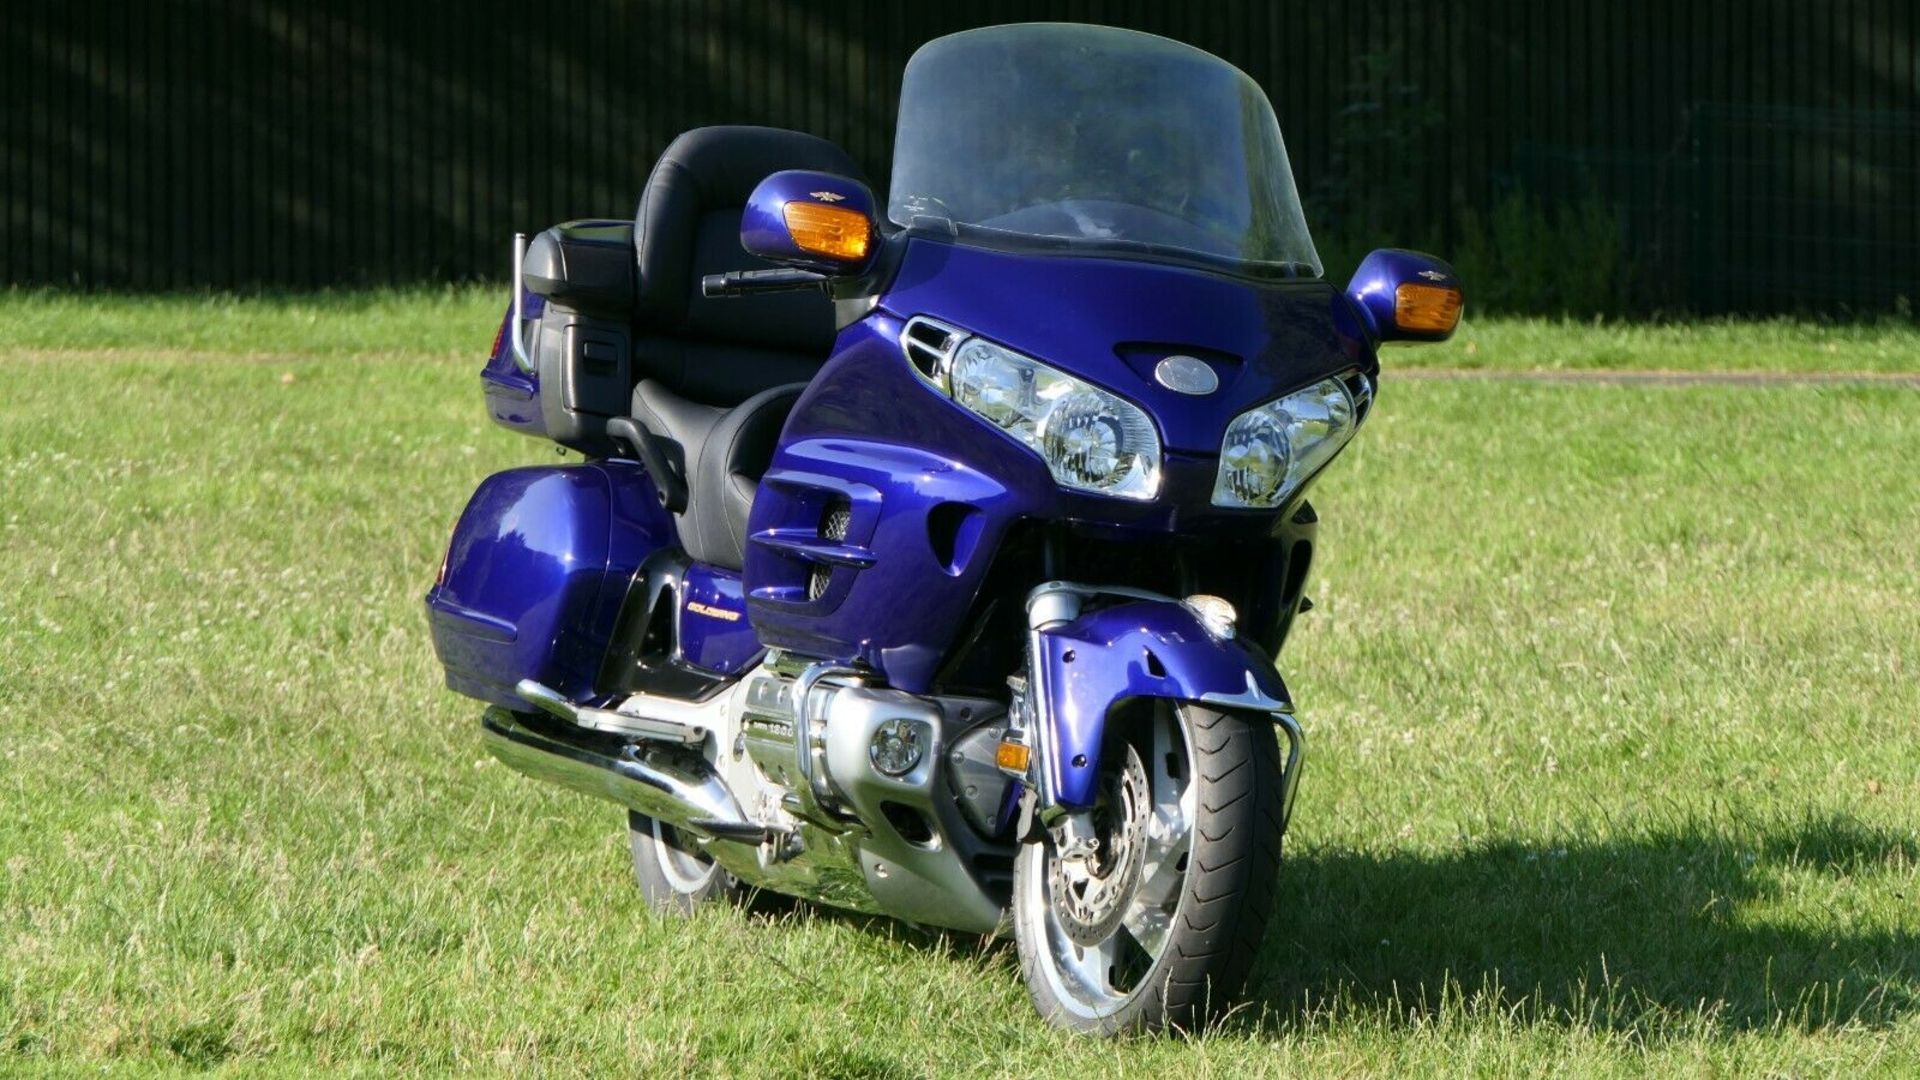 HONDA GL1800 GOLDWING ABS 2003 MOTORCYCLE 51K MILES - EXTRAS, MOT, LOW MILES, FSH, GREAT CONDITION - Image 9 of 12